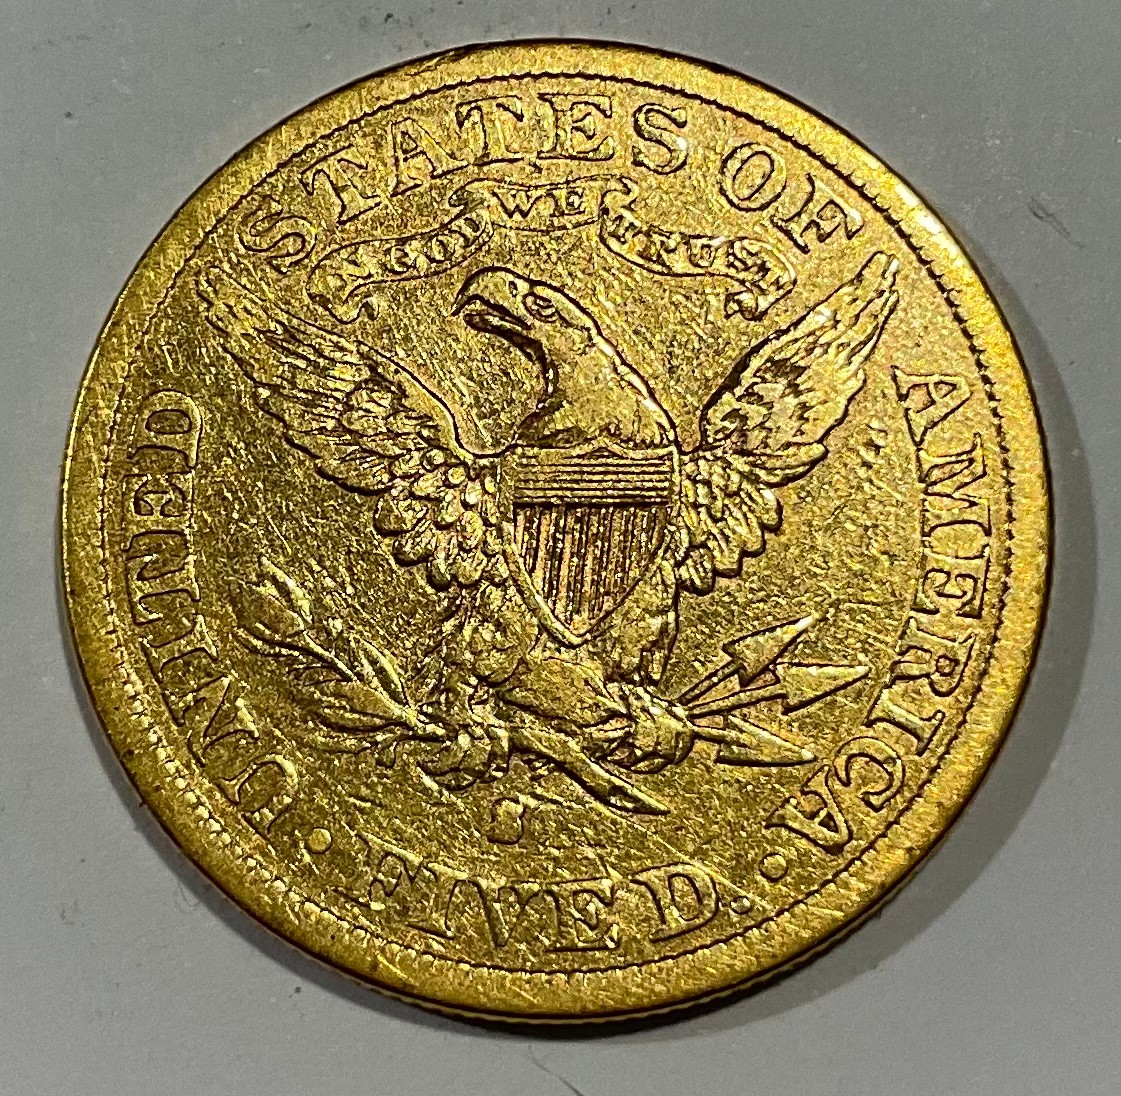 Coins - an American gold $5 coin, 1881 - Image 2 of 2